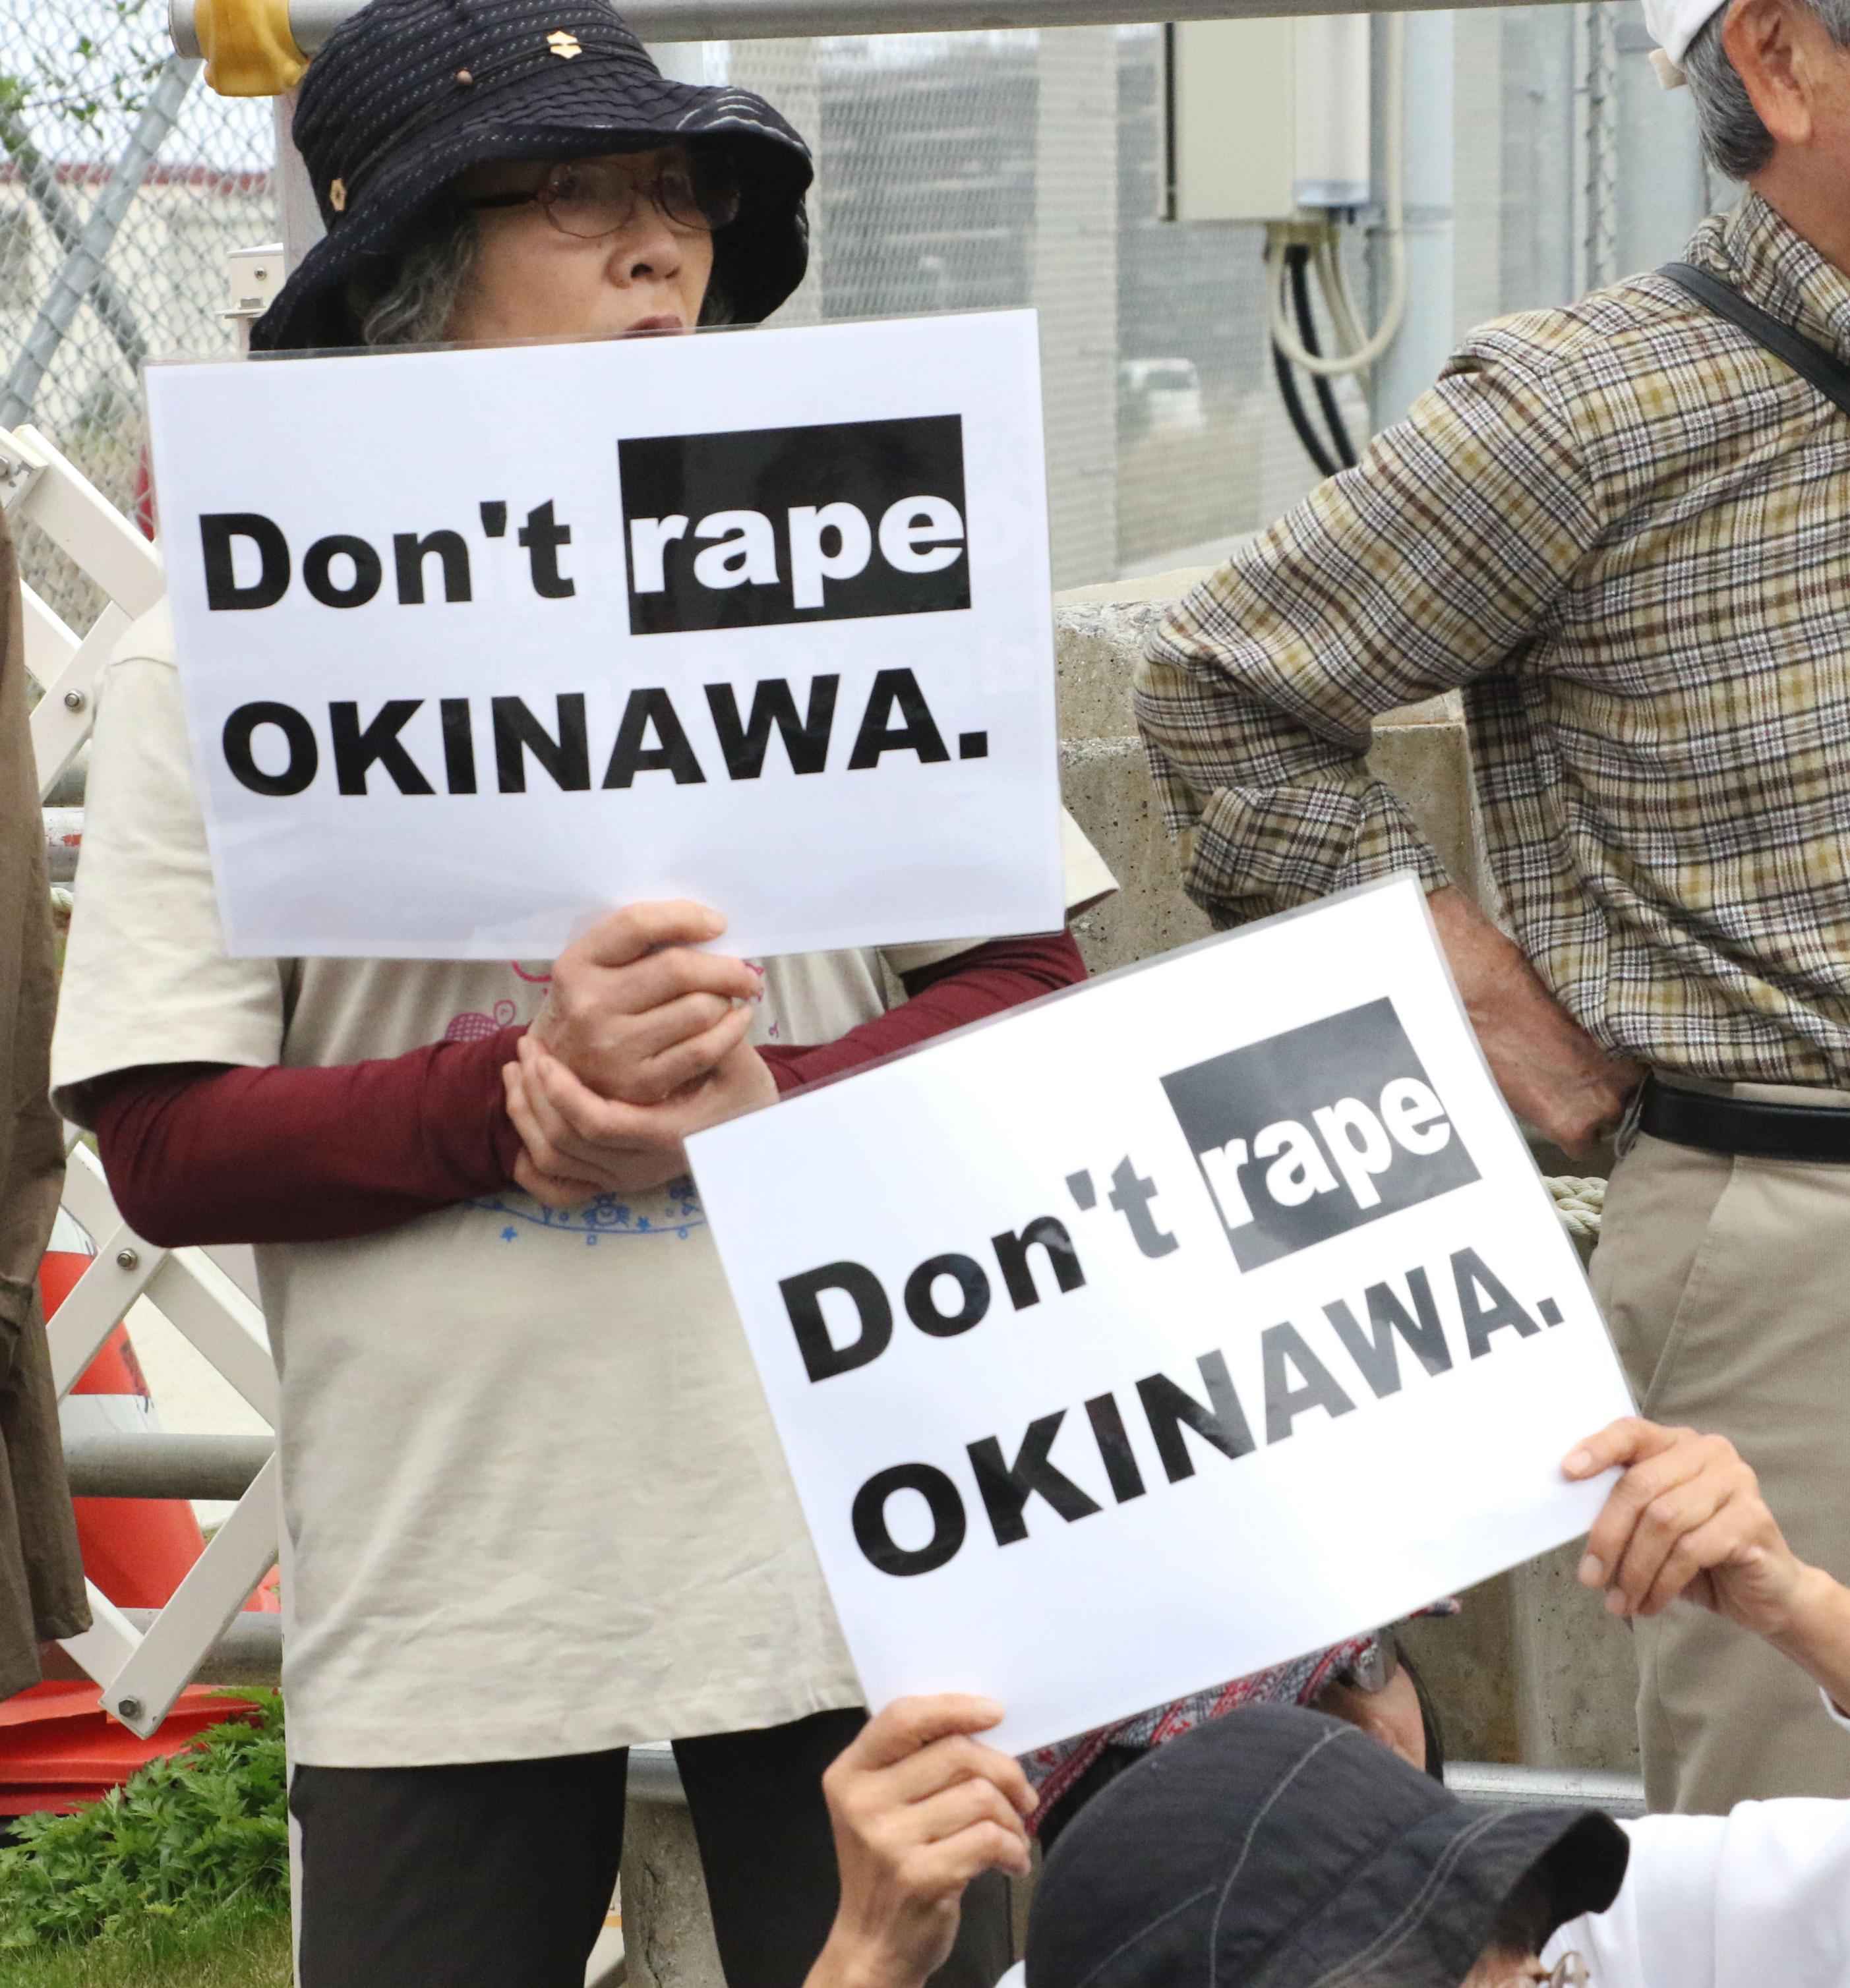 Thousands protest in Okinawa over alleged rape by U.S. serviceman